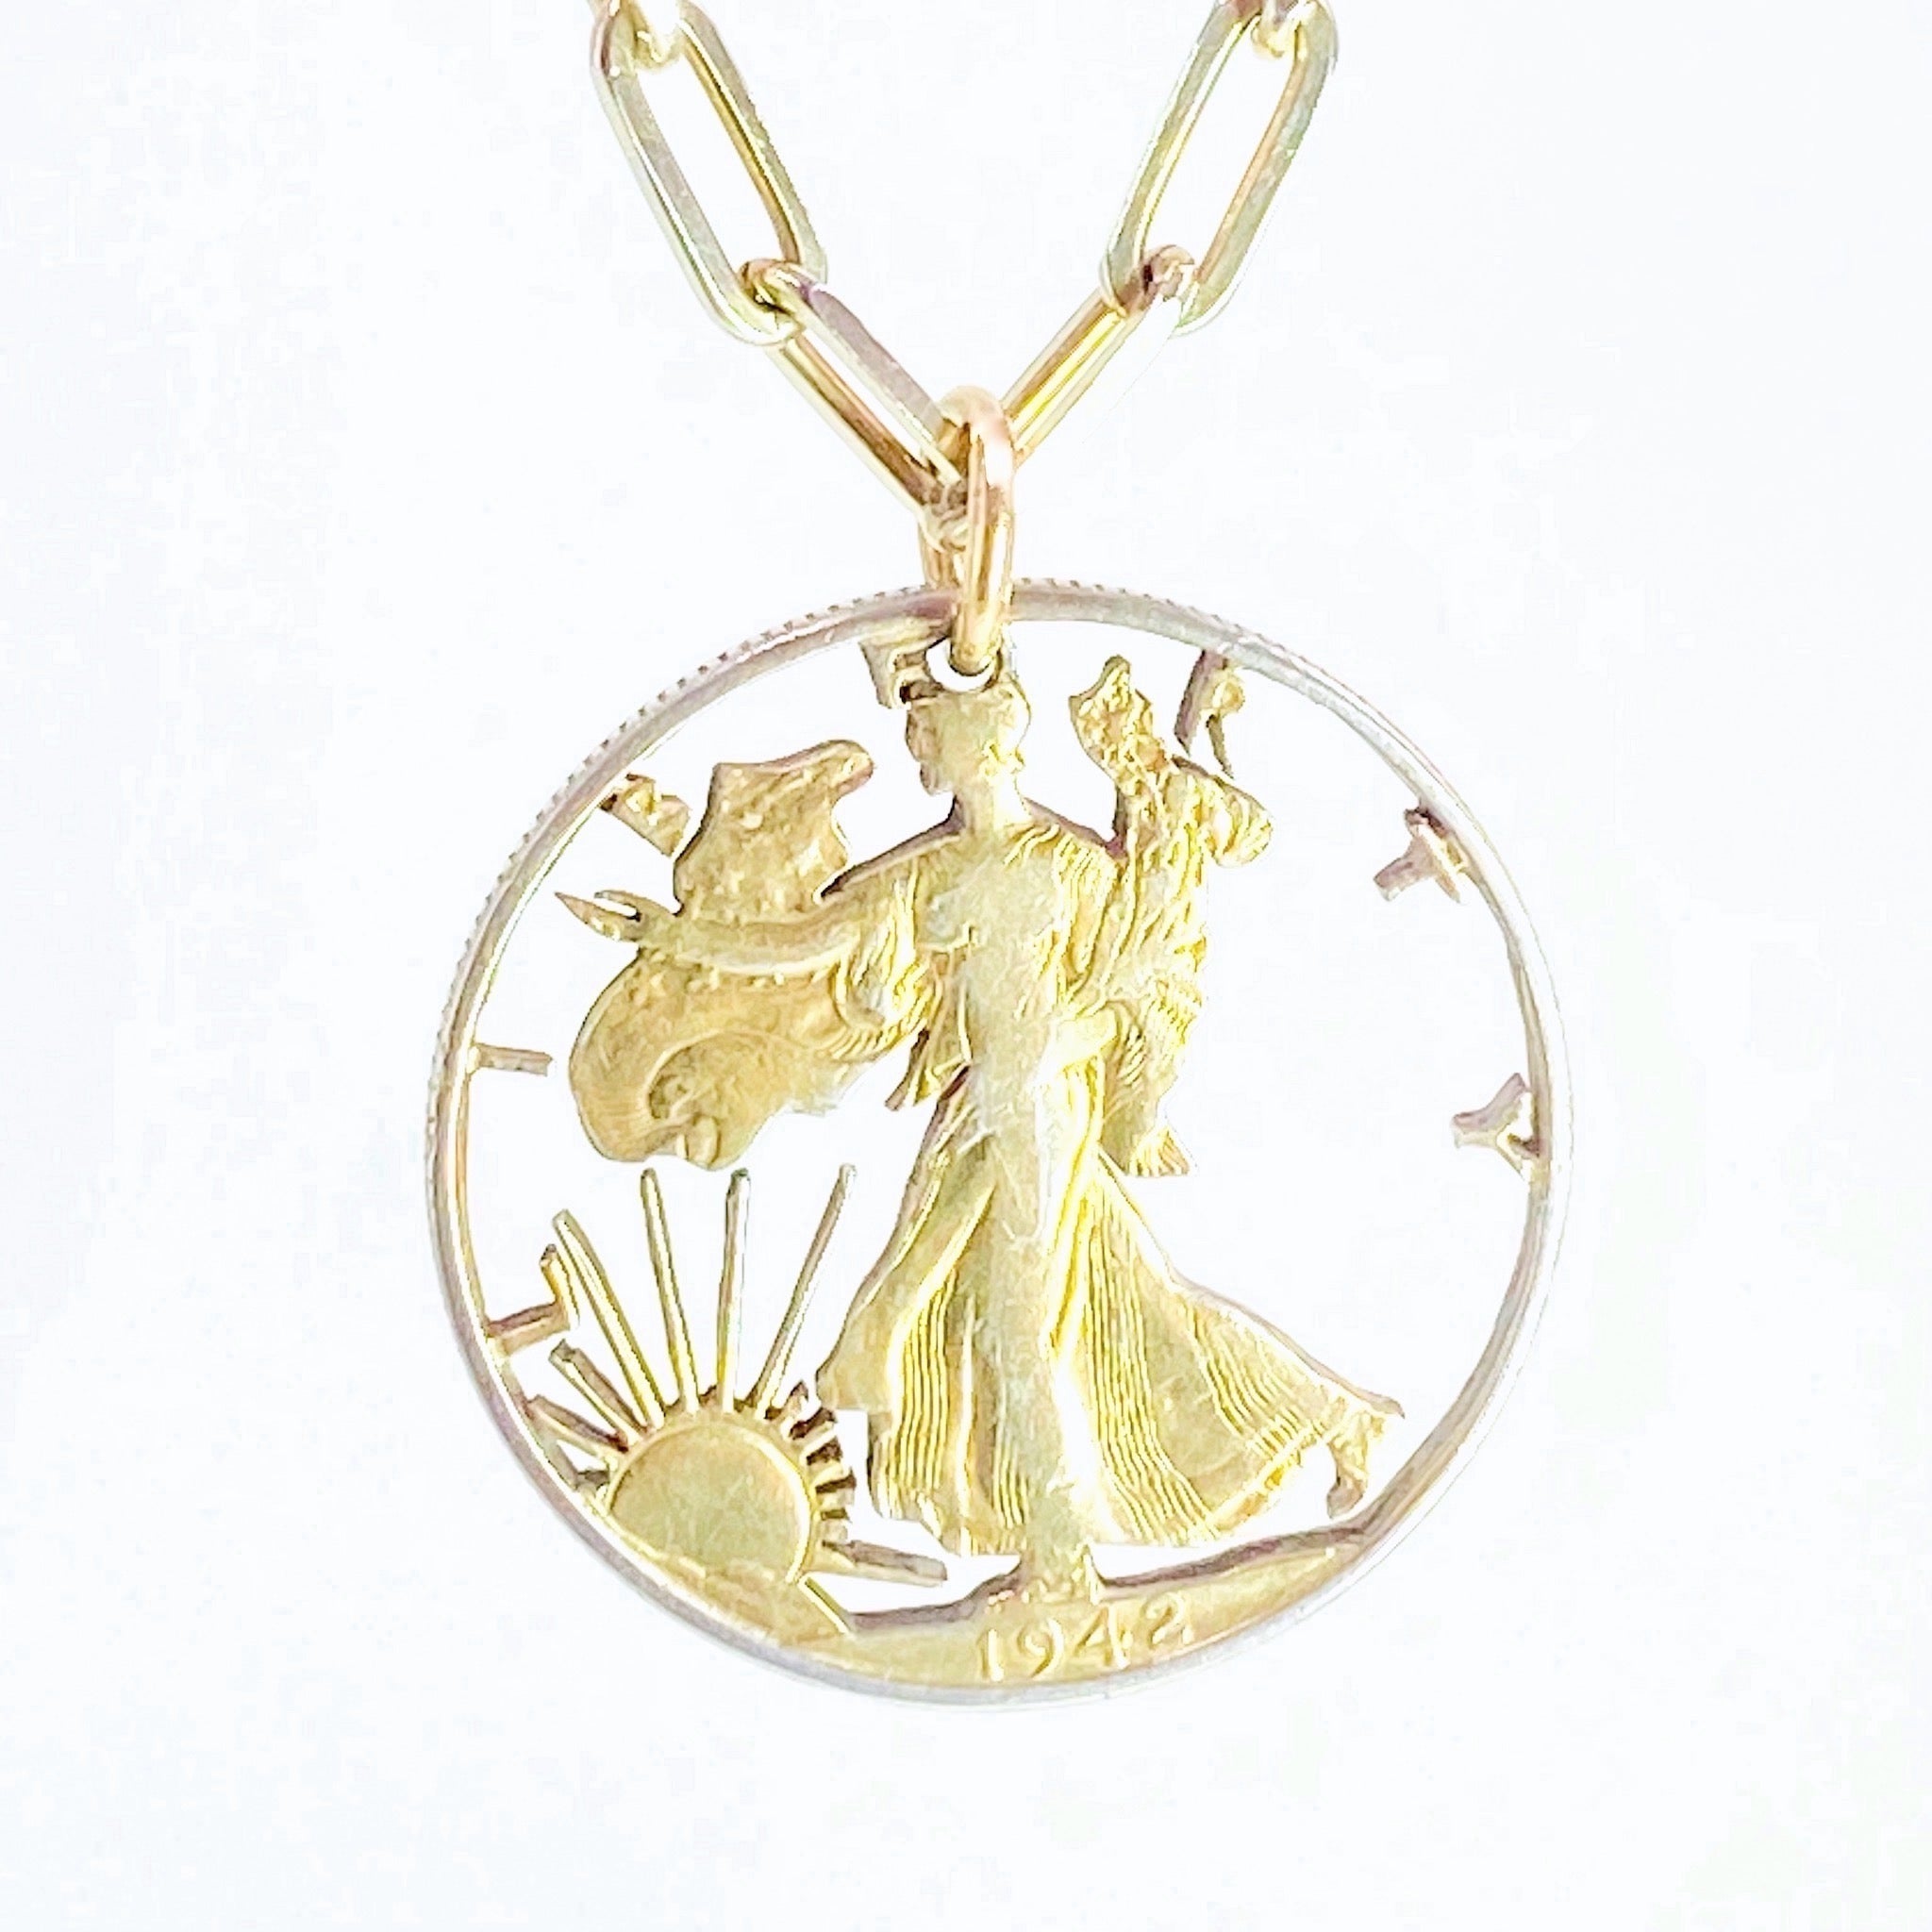 Walking Liberty Half Dollar Necklace With Gold Wash